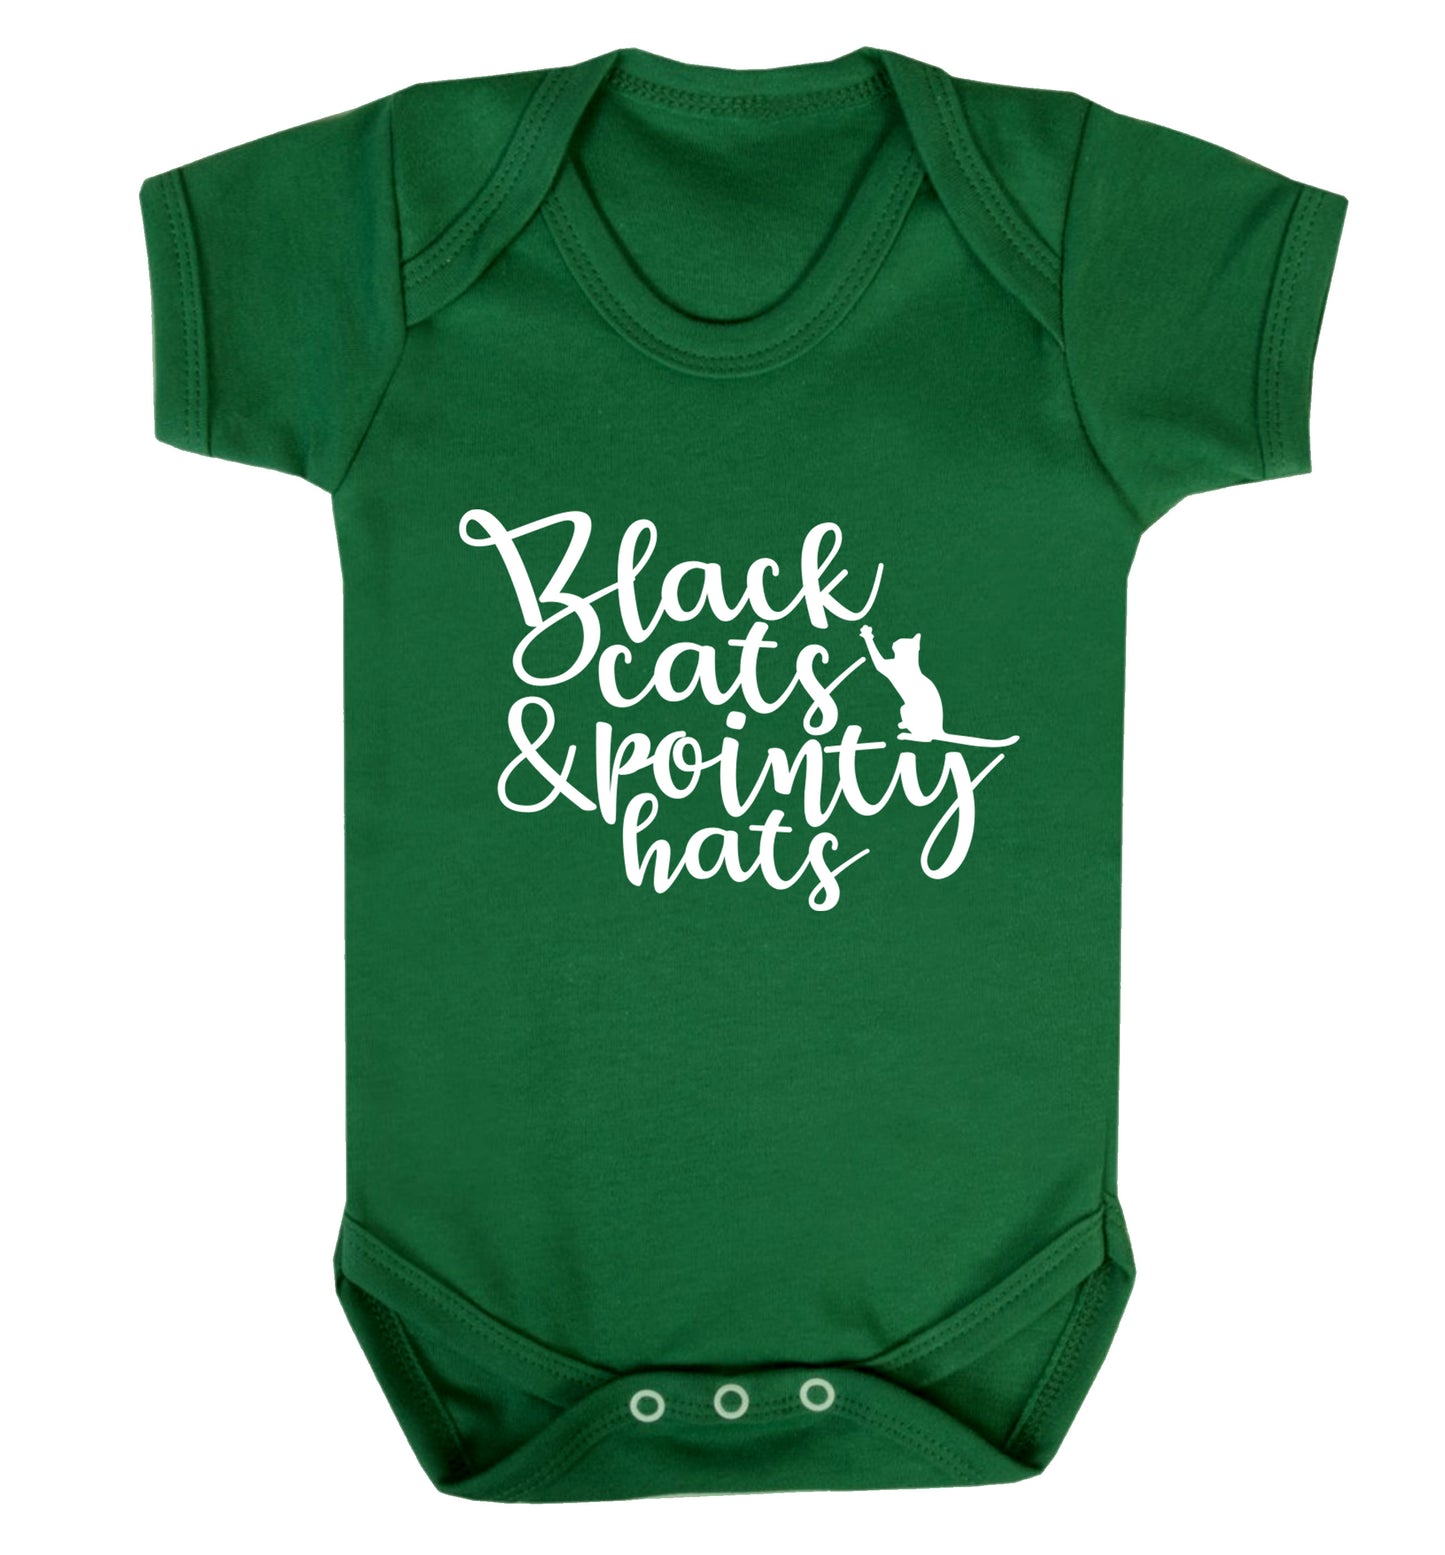 Black cats and pointy hats Baby Vest green 18-24 months